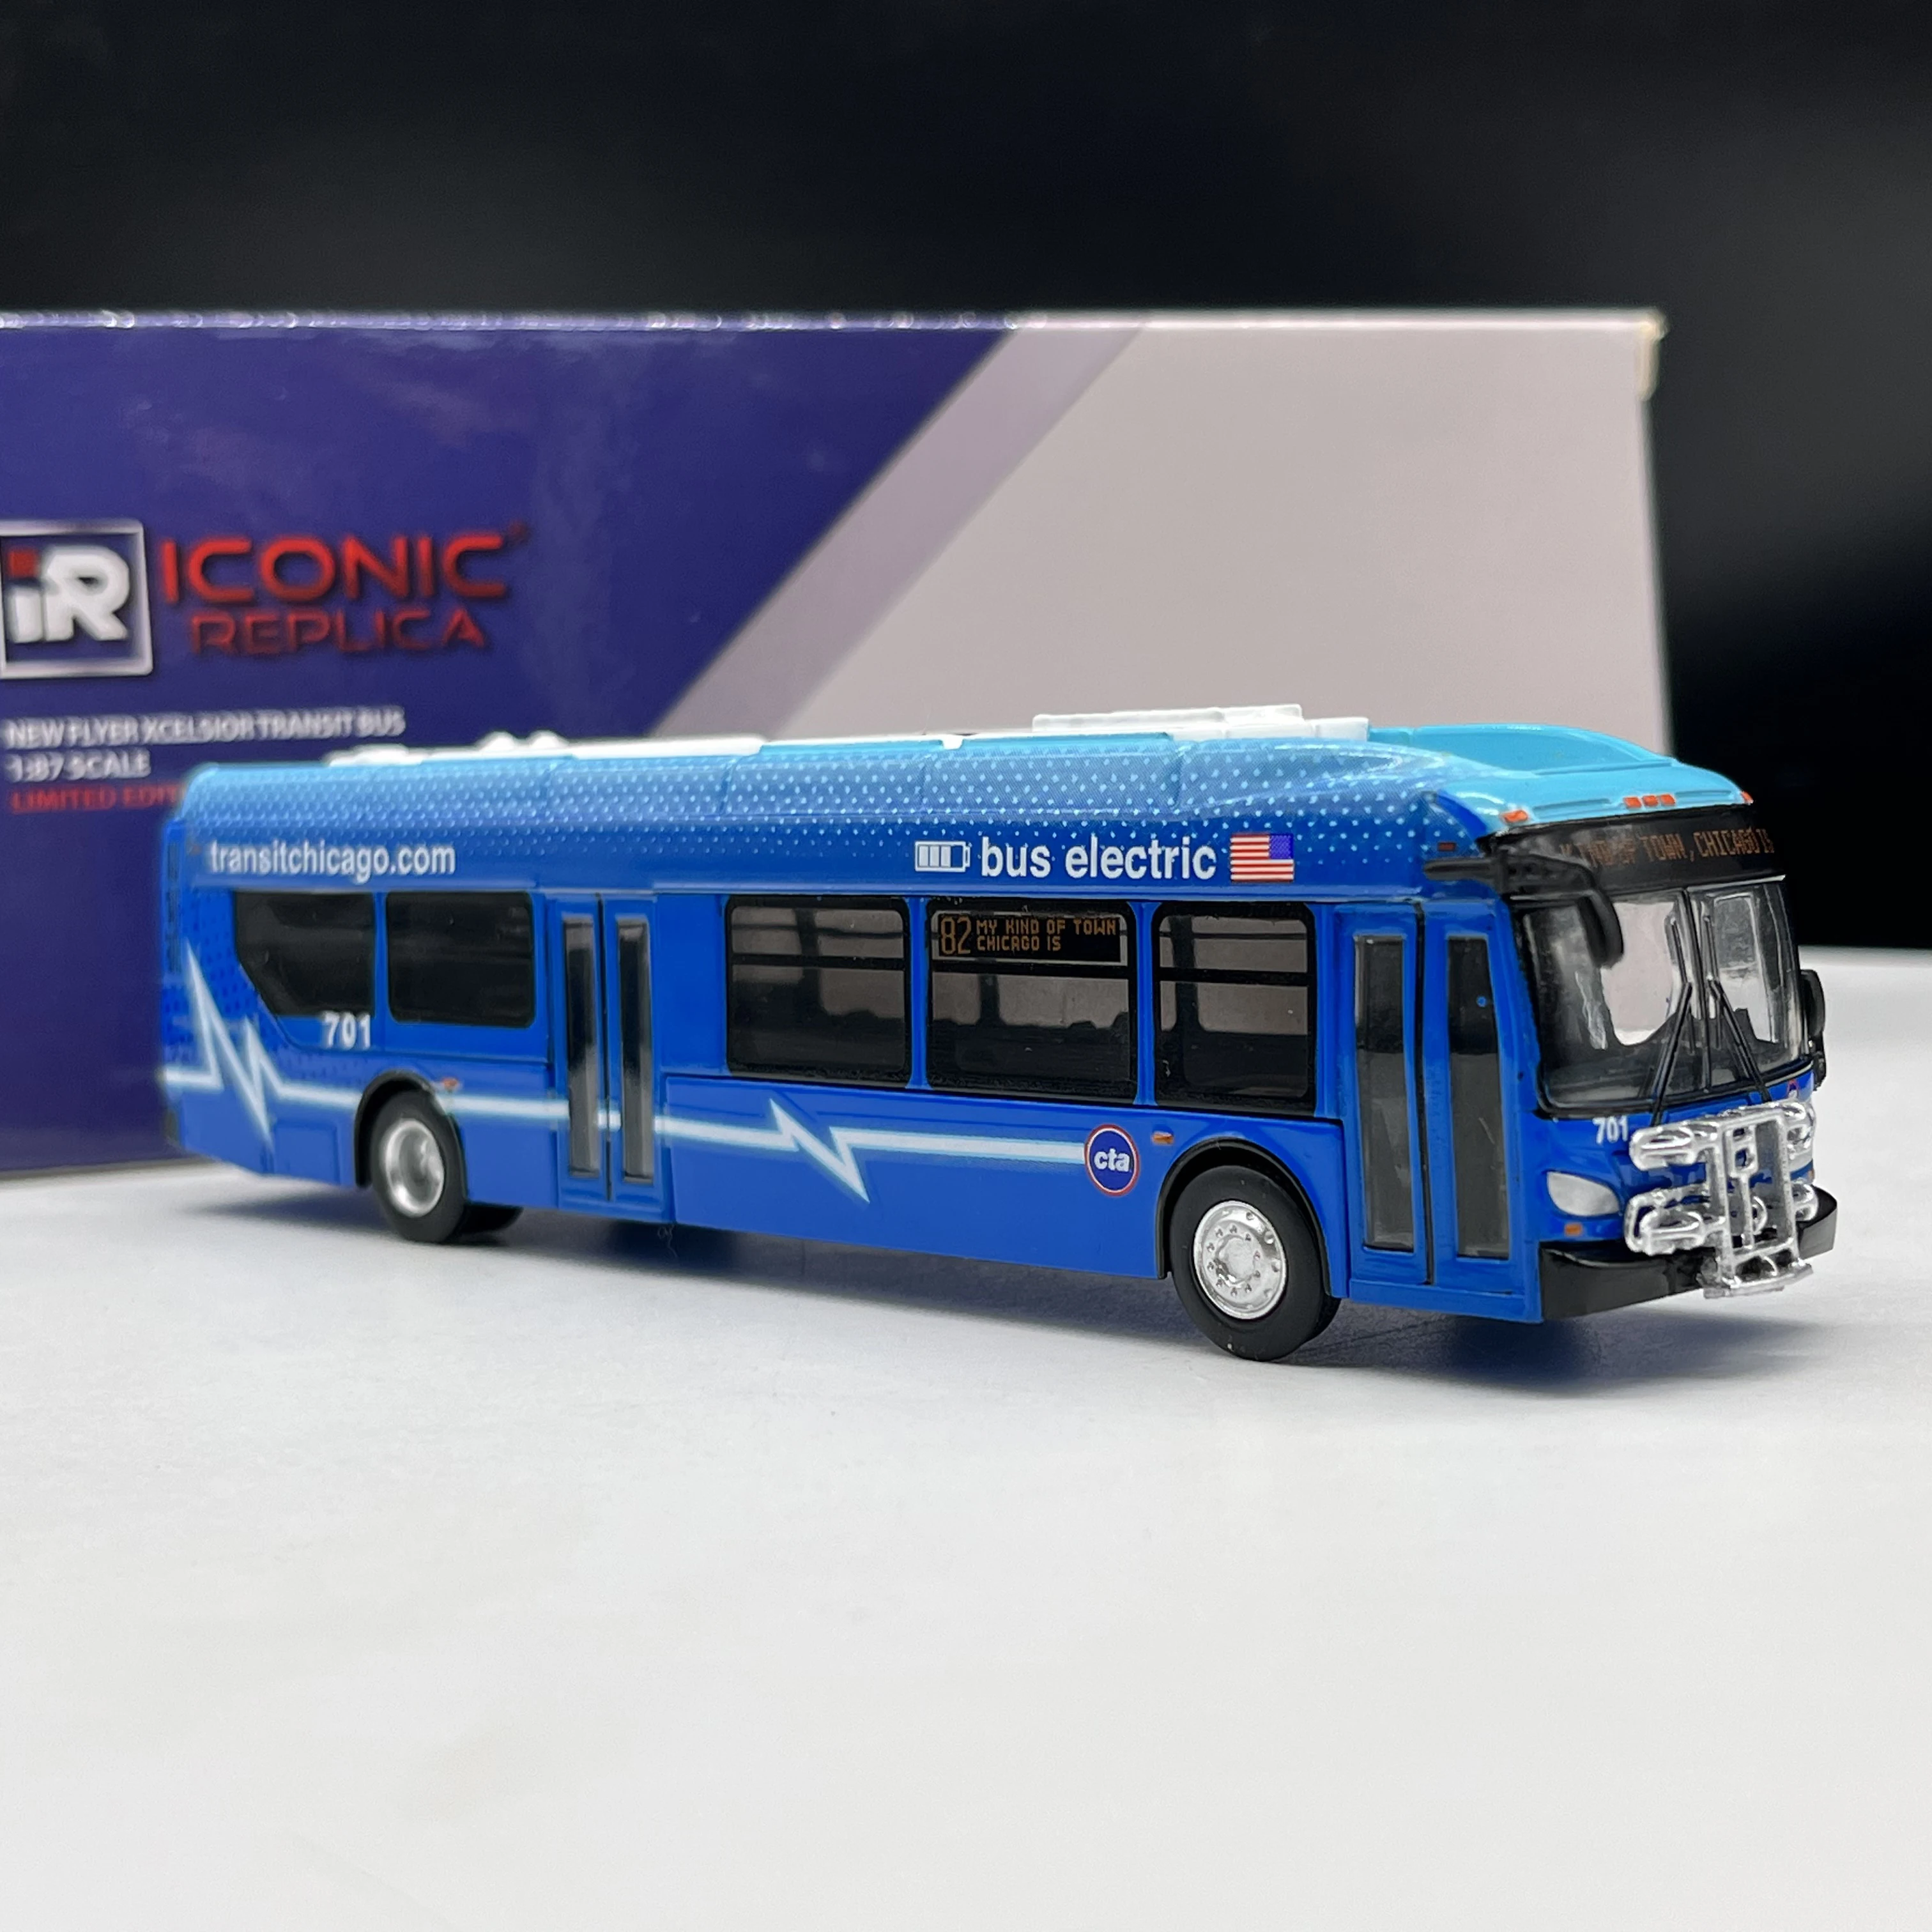 

Diecast 1/87 Scale New Flyer City Bus Alloy Model Car Collection Boutique Decoration Display Gift Souvenir Collectible Toy Gift